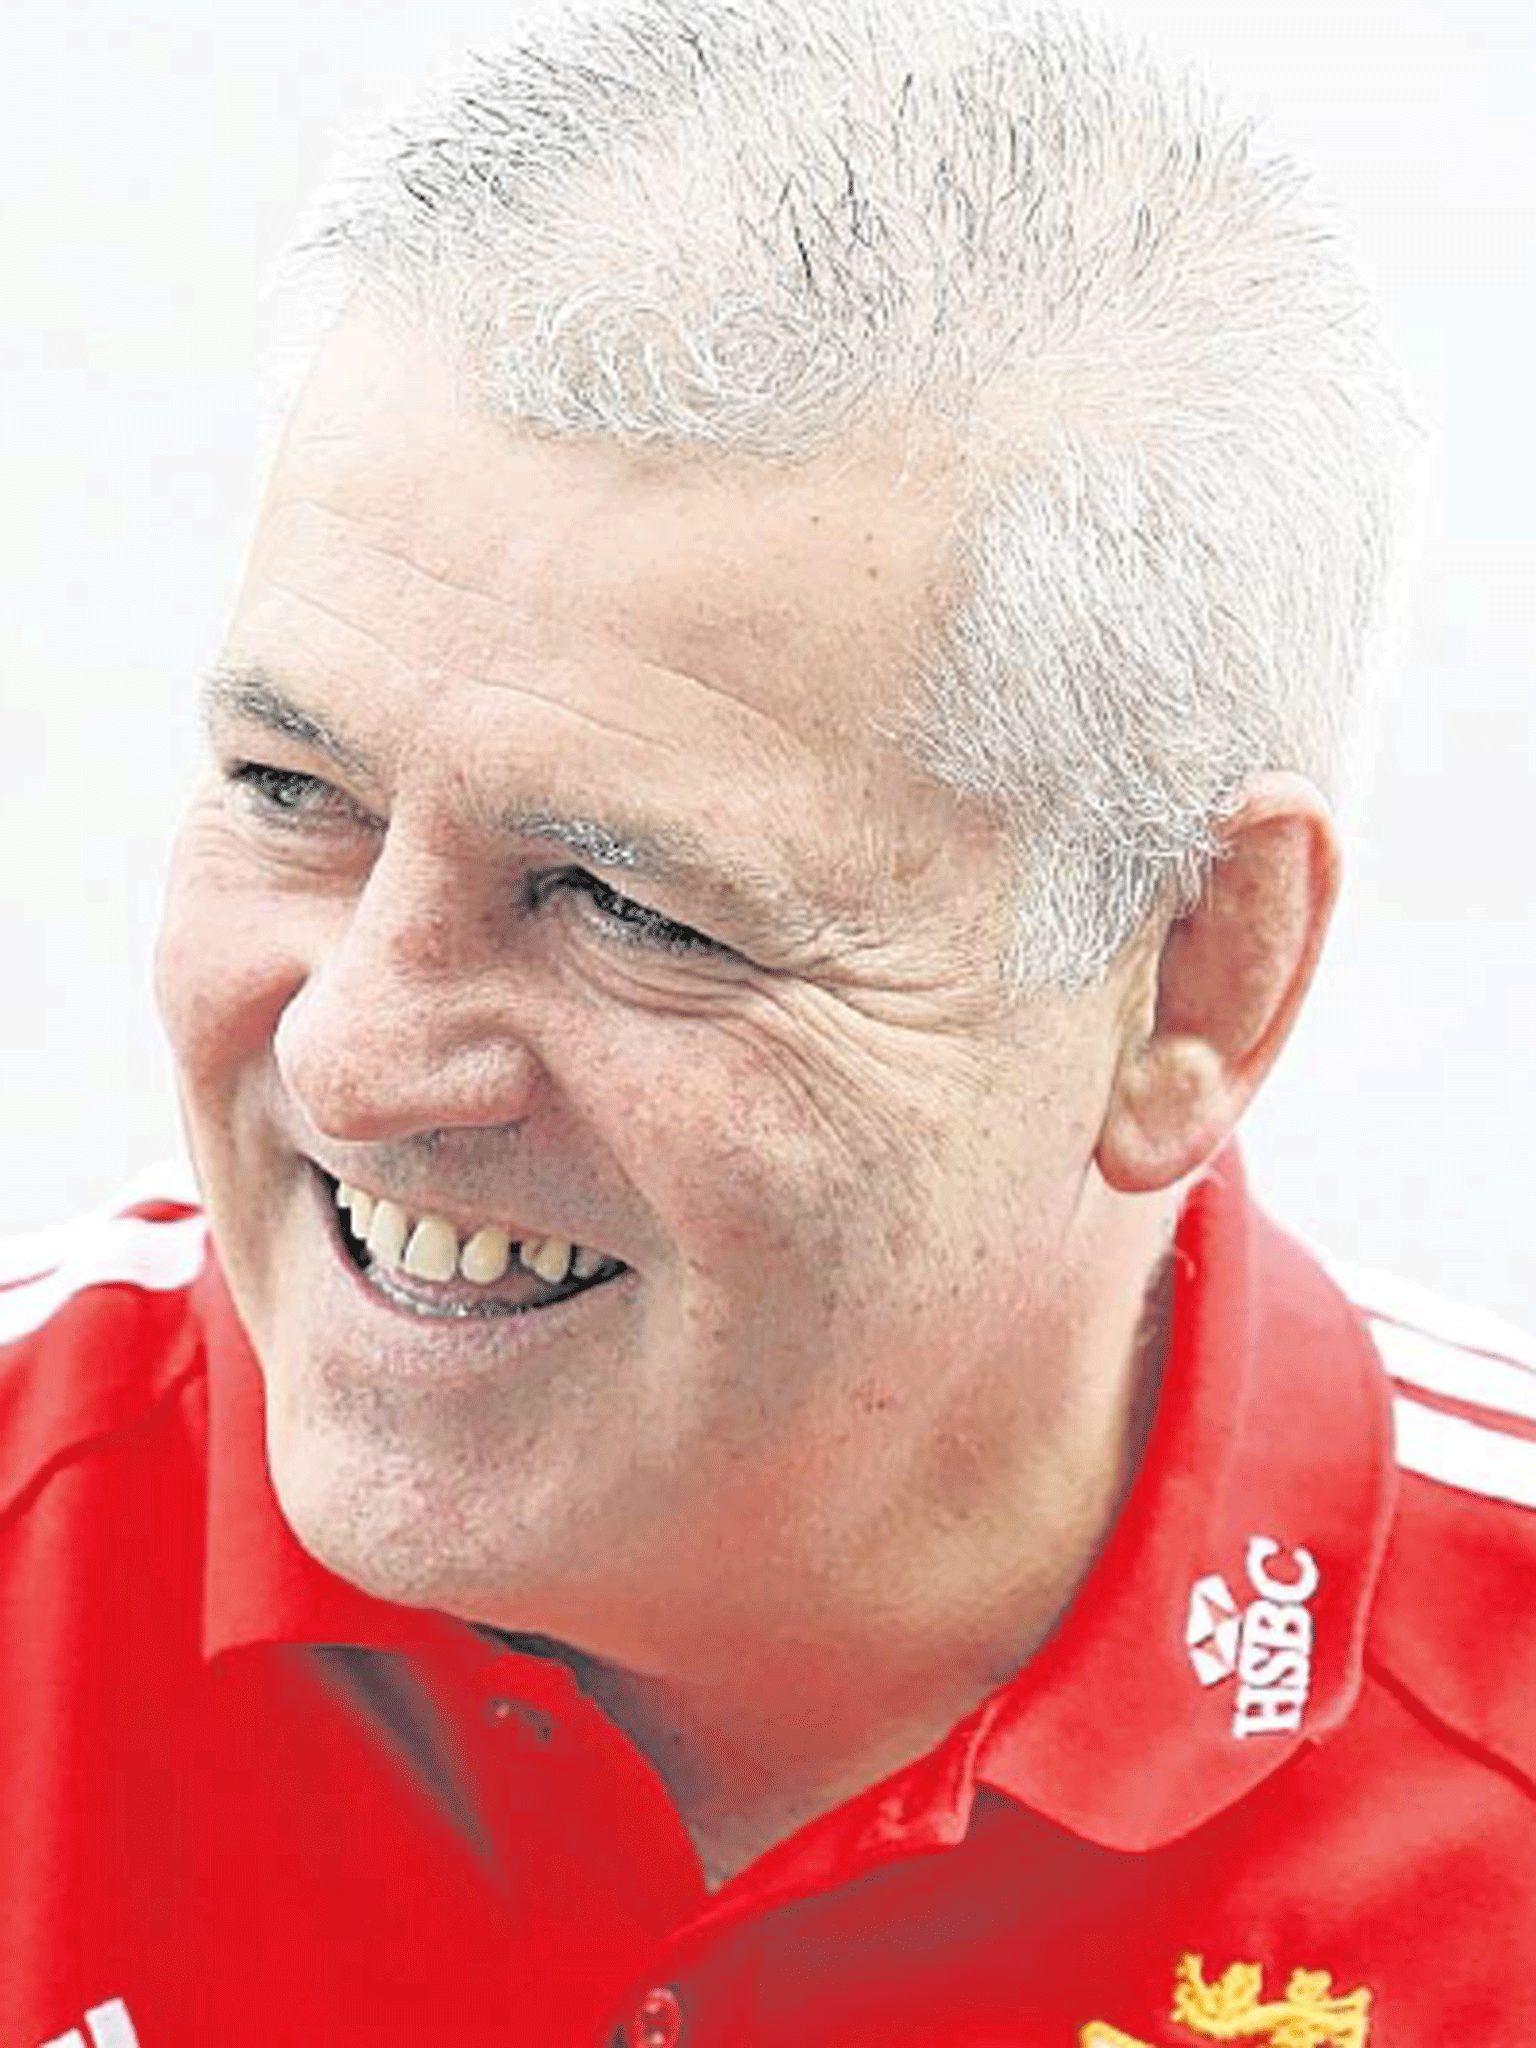 Warren Gatland’s comments caused some raised eyebrows